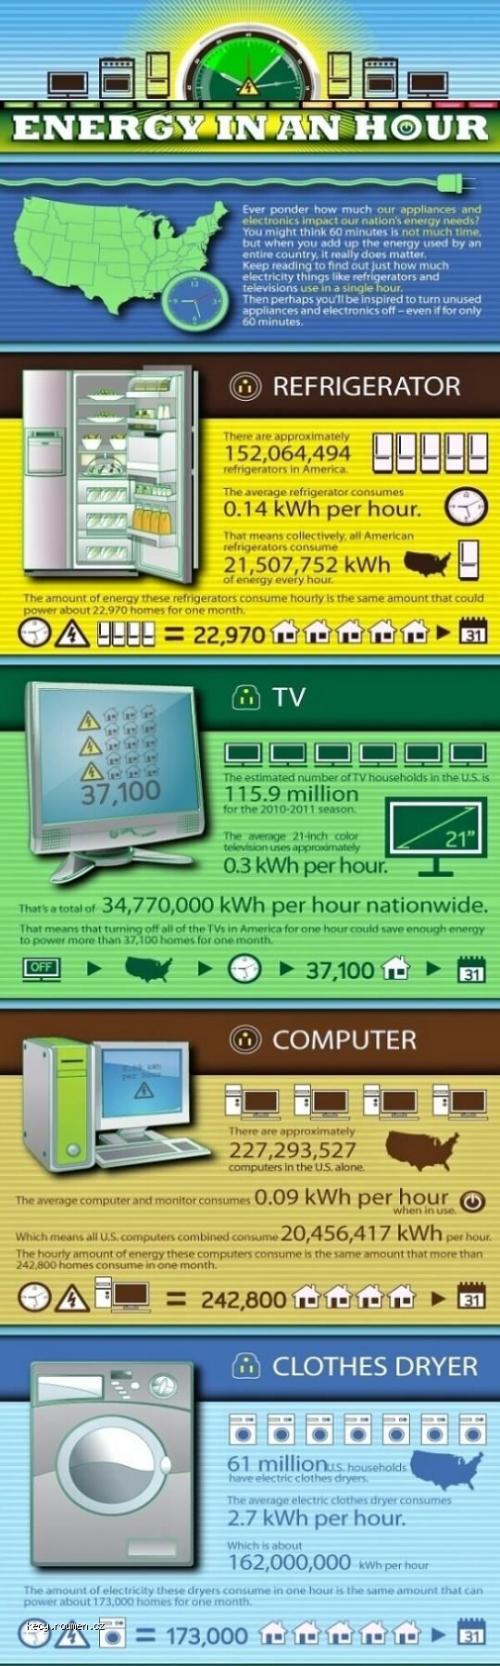  Energy Consumption In 1 Hour 